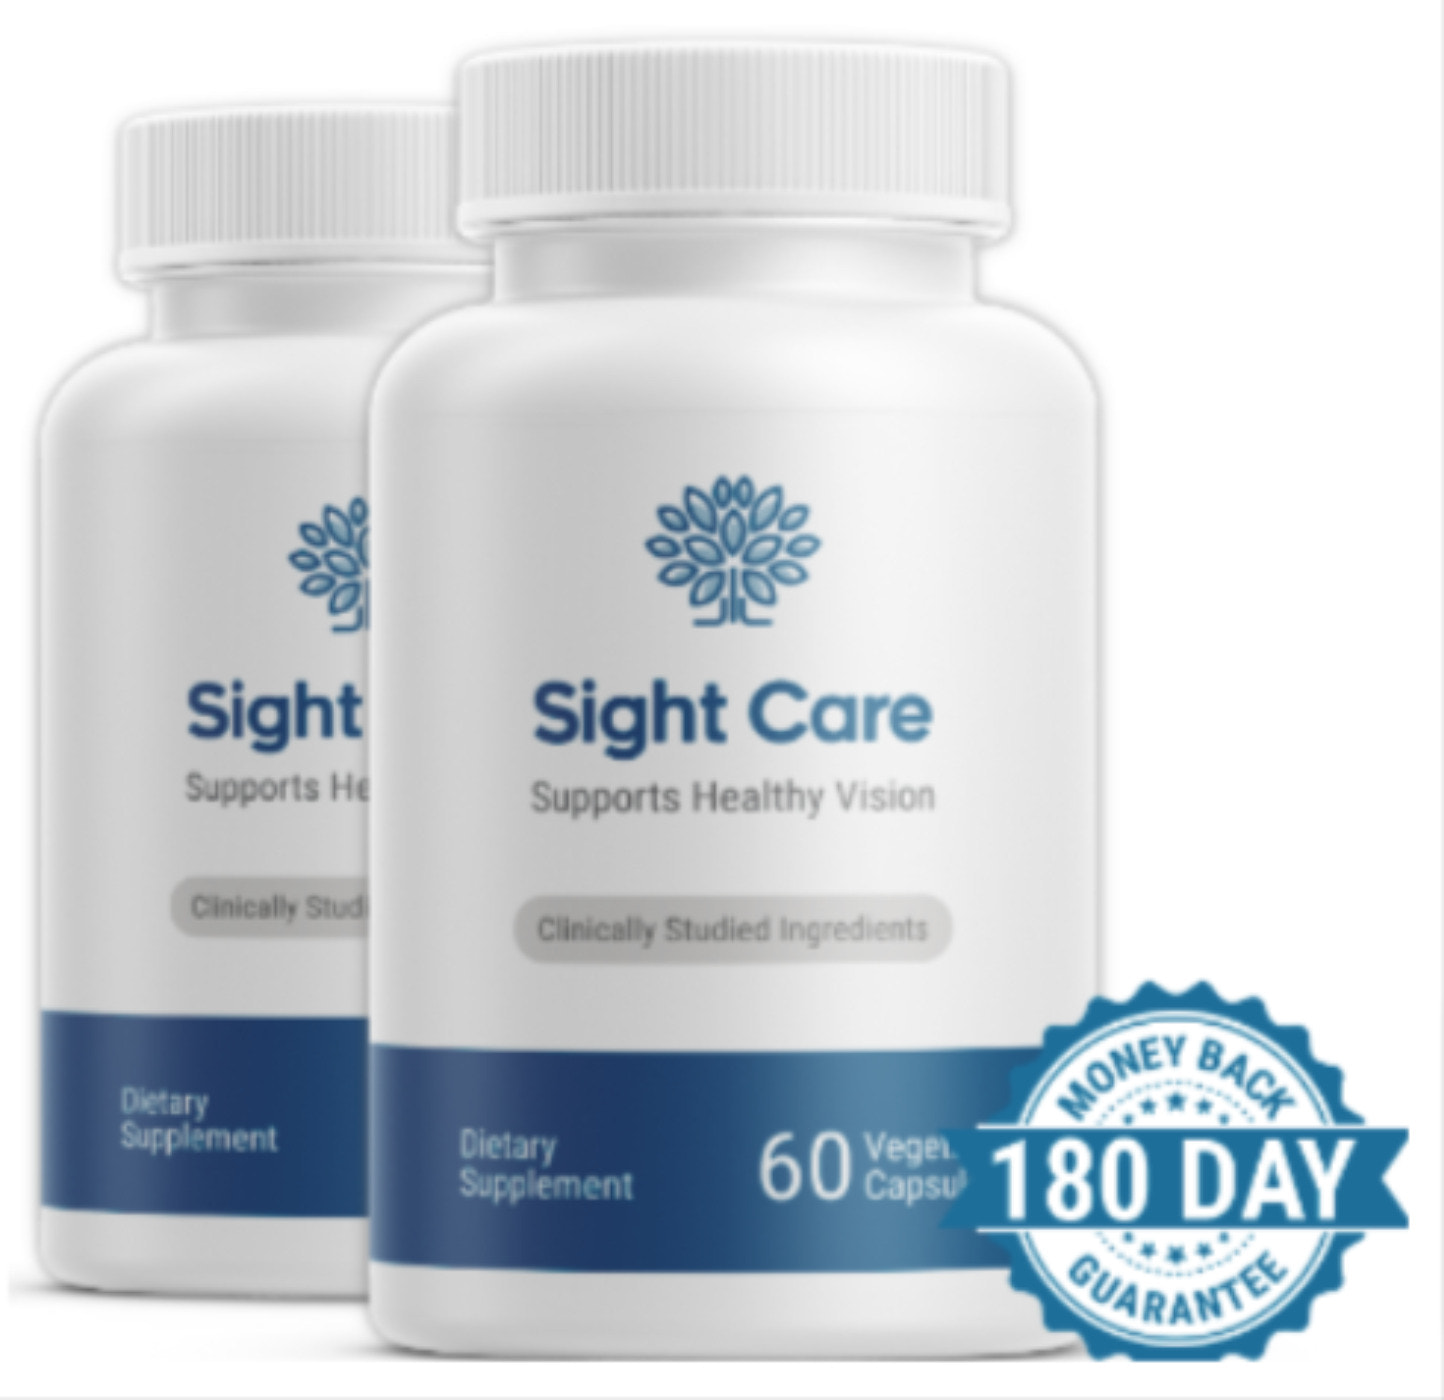 Sight Care [update] - Is Really Help Vision Health?